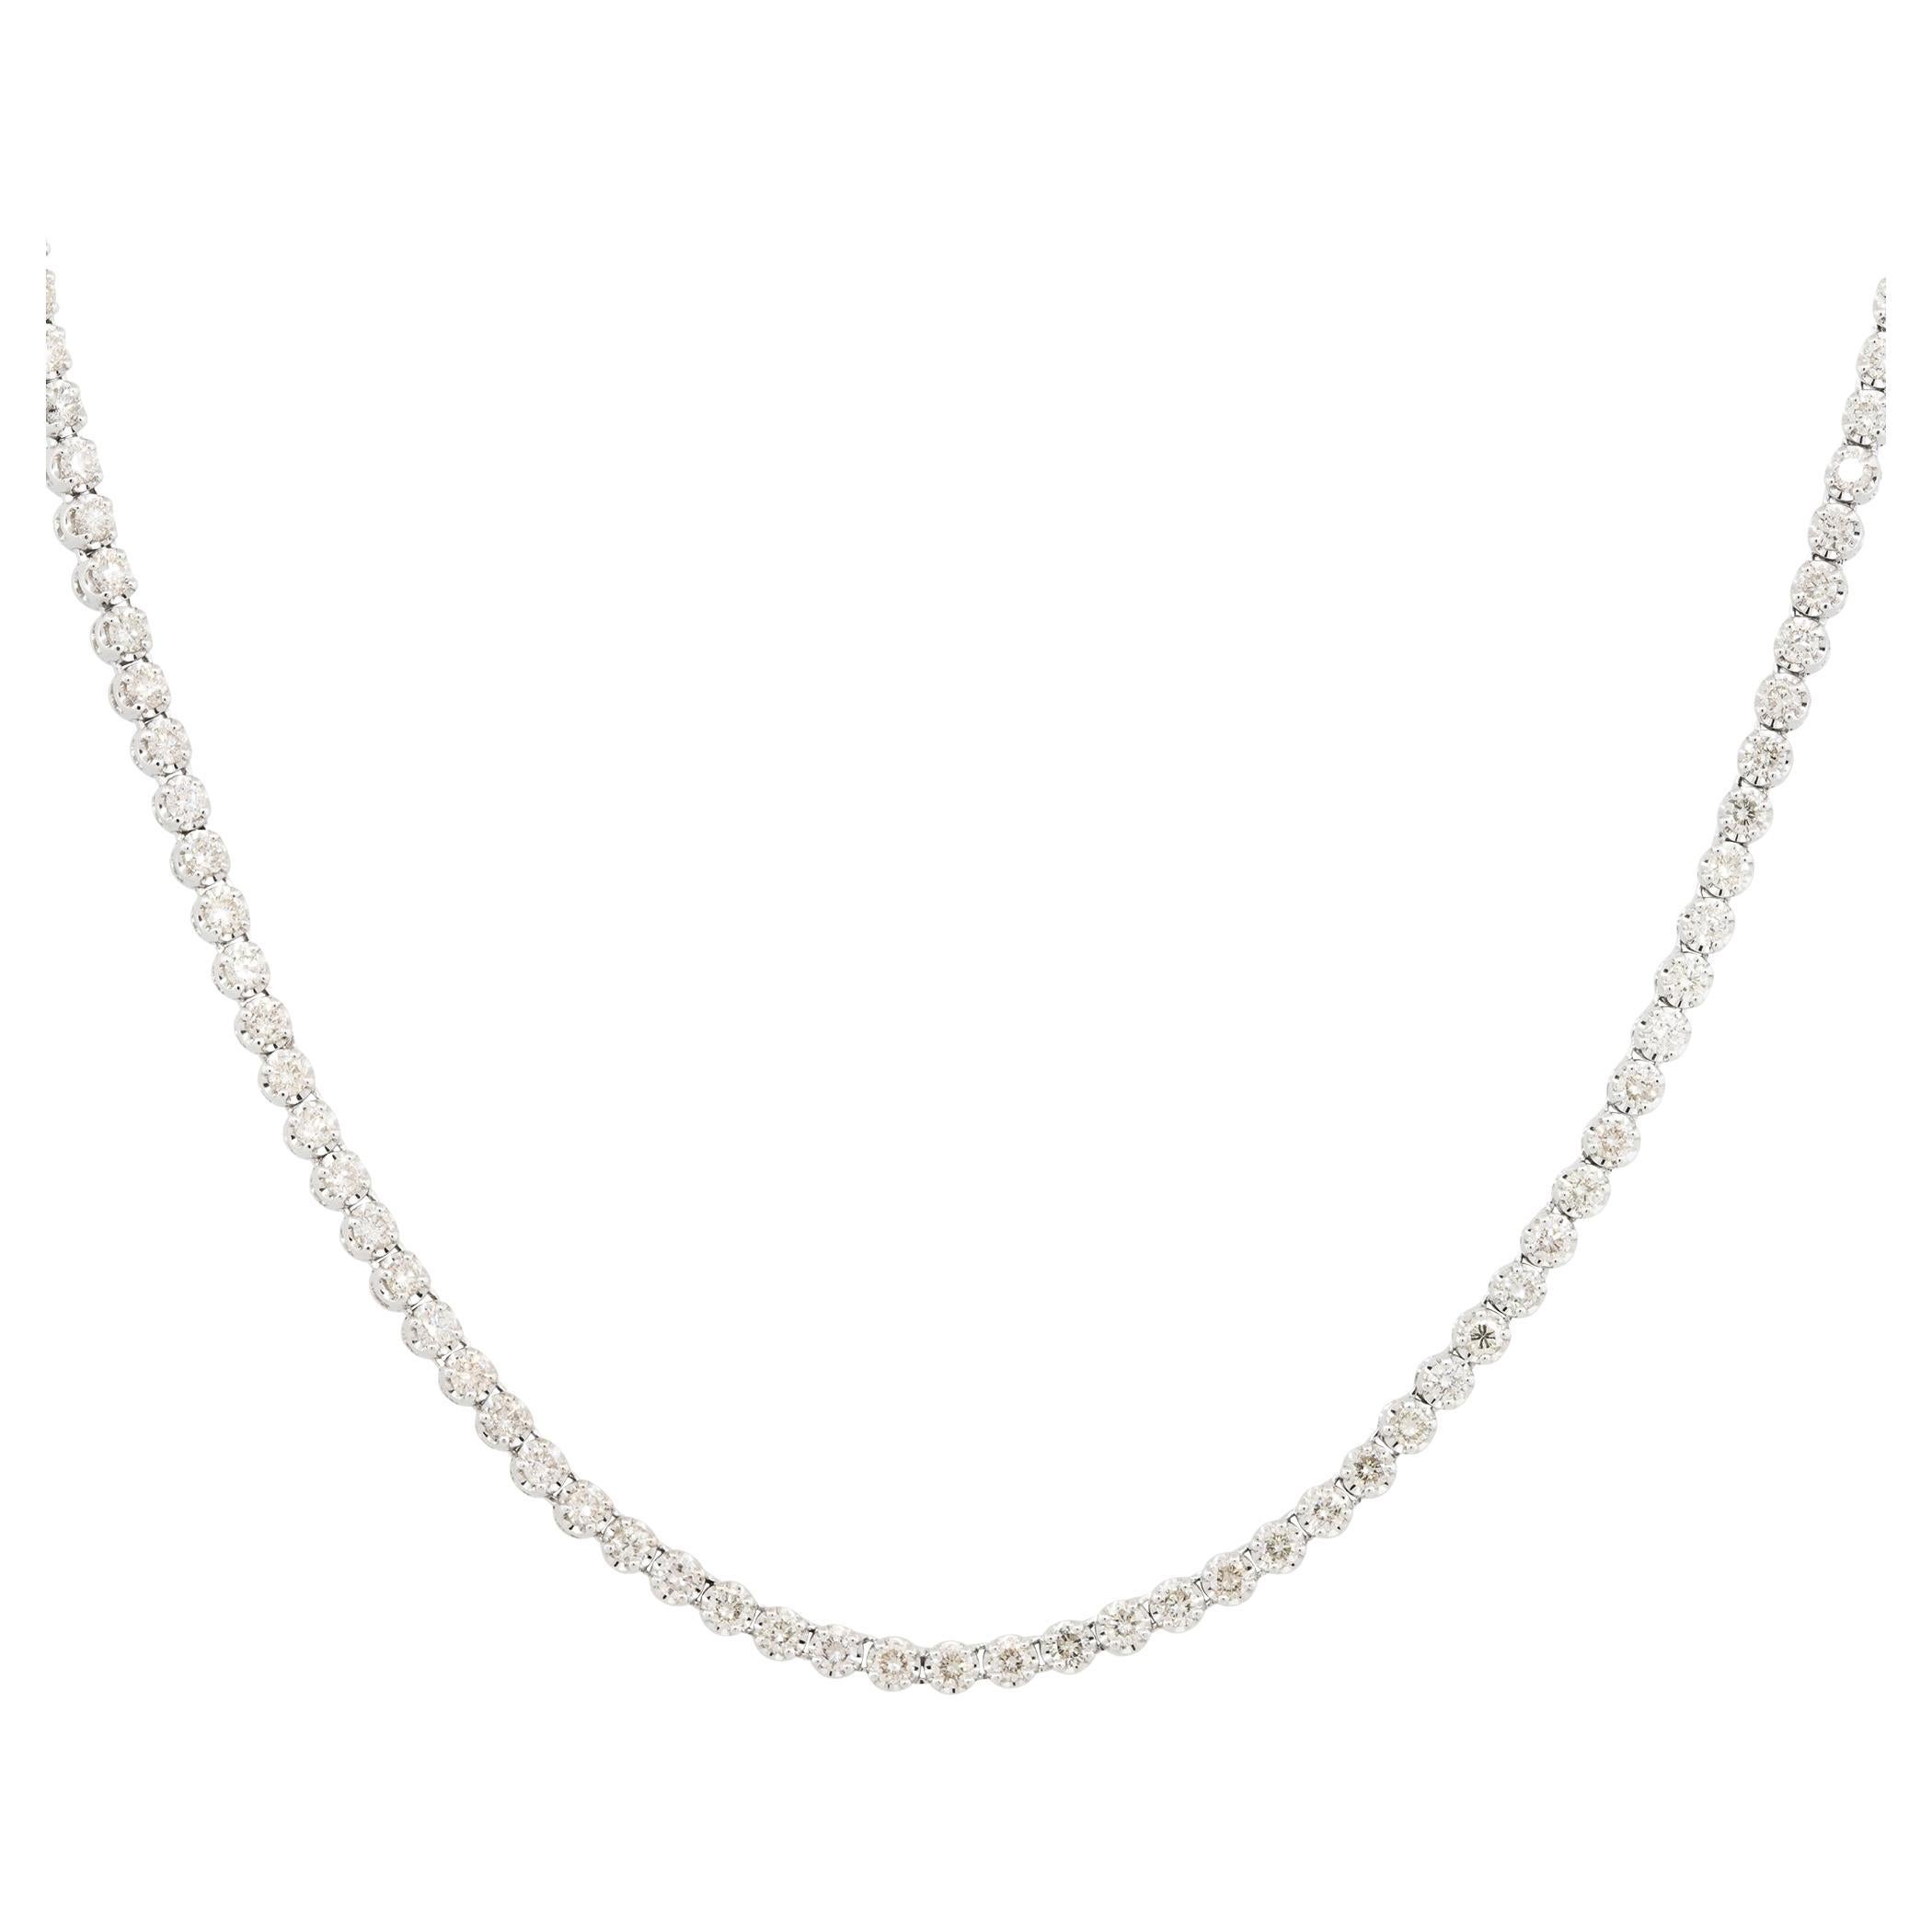 There are many reasons why this tennis necklace is so unique. There are 18.5 inches of round brilliant diamonds throughout this necklace, making it long enough to be layered with other necklaces or worn by itself. The chain is made from 14 karat